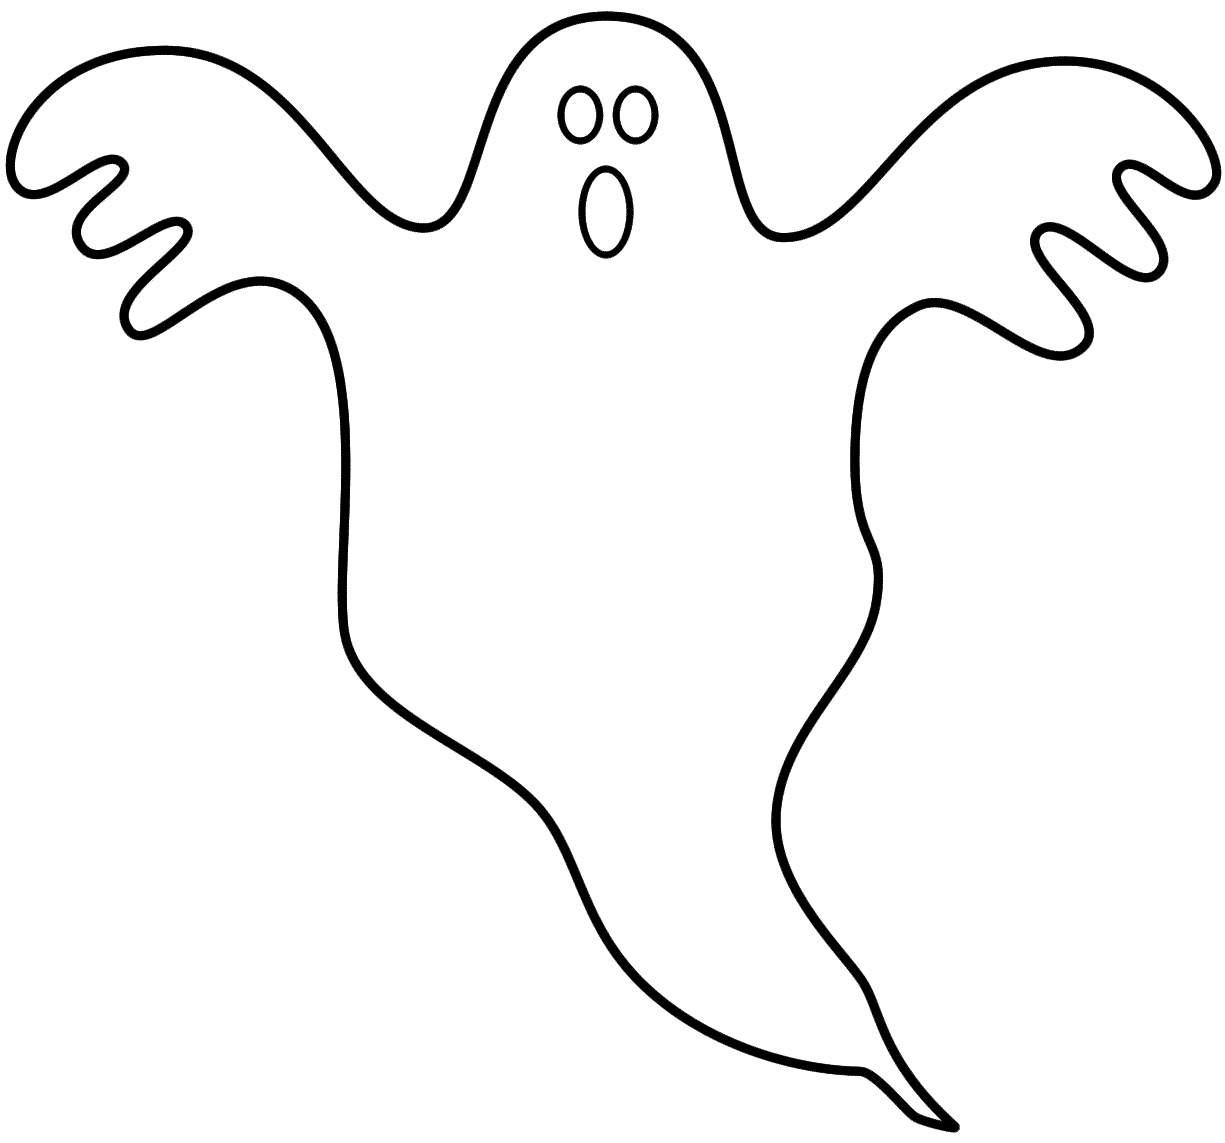 Boo Ghost Coloring Page - Coloring Pages For All Ages - Coloring Home